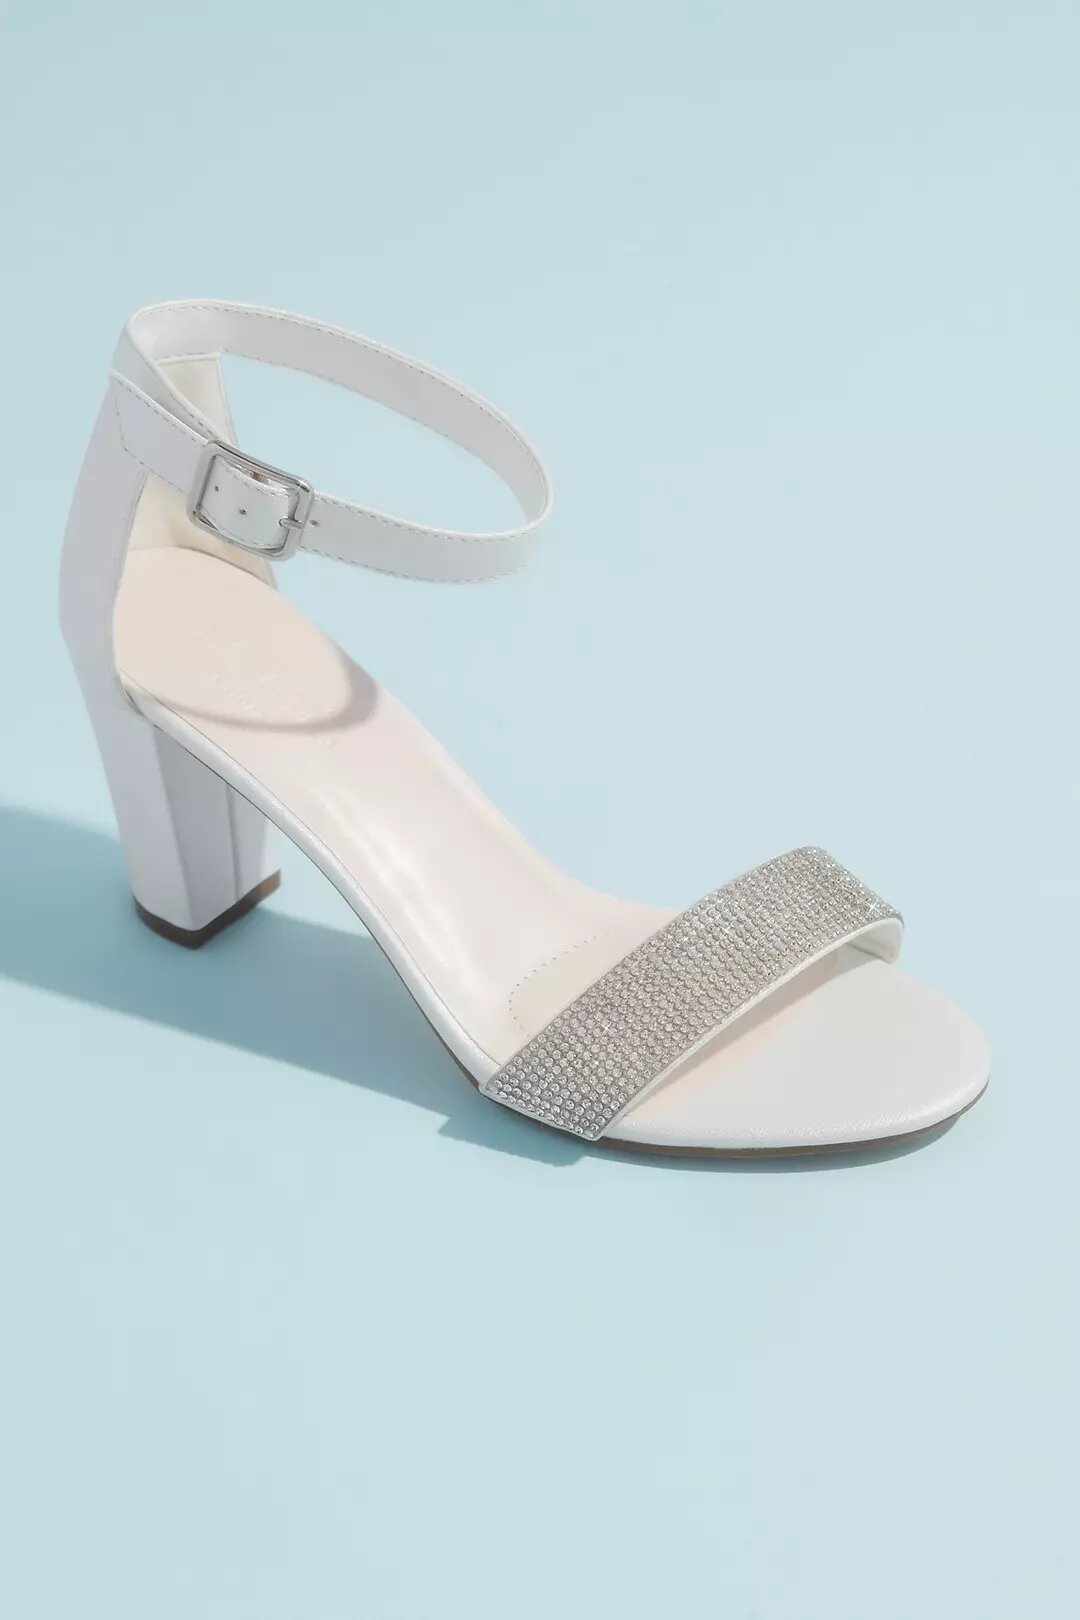 38% Off Block Heel with Crystal Toe Strap $37 Shipped